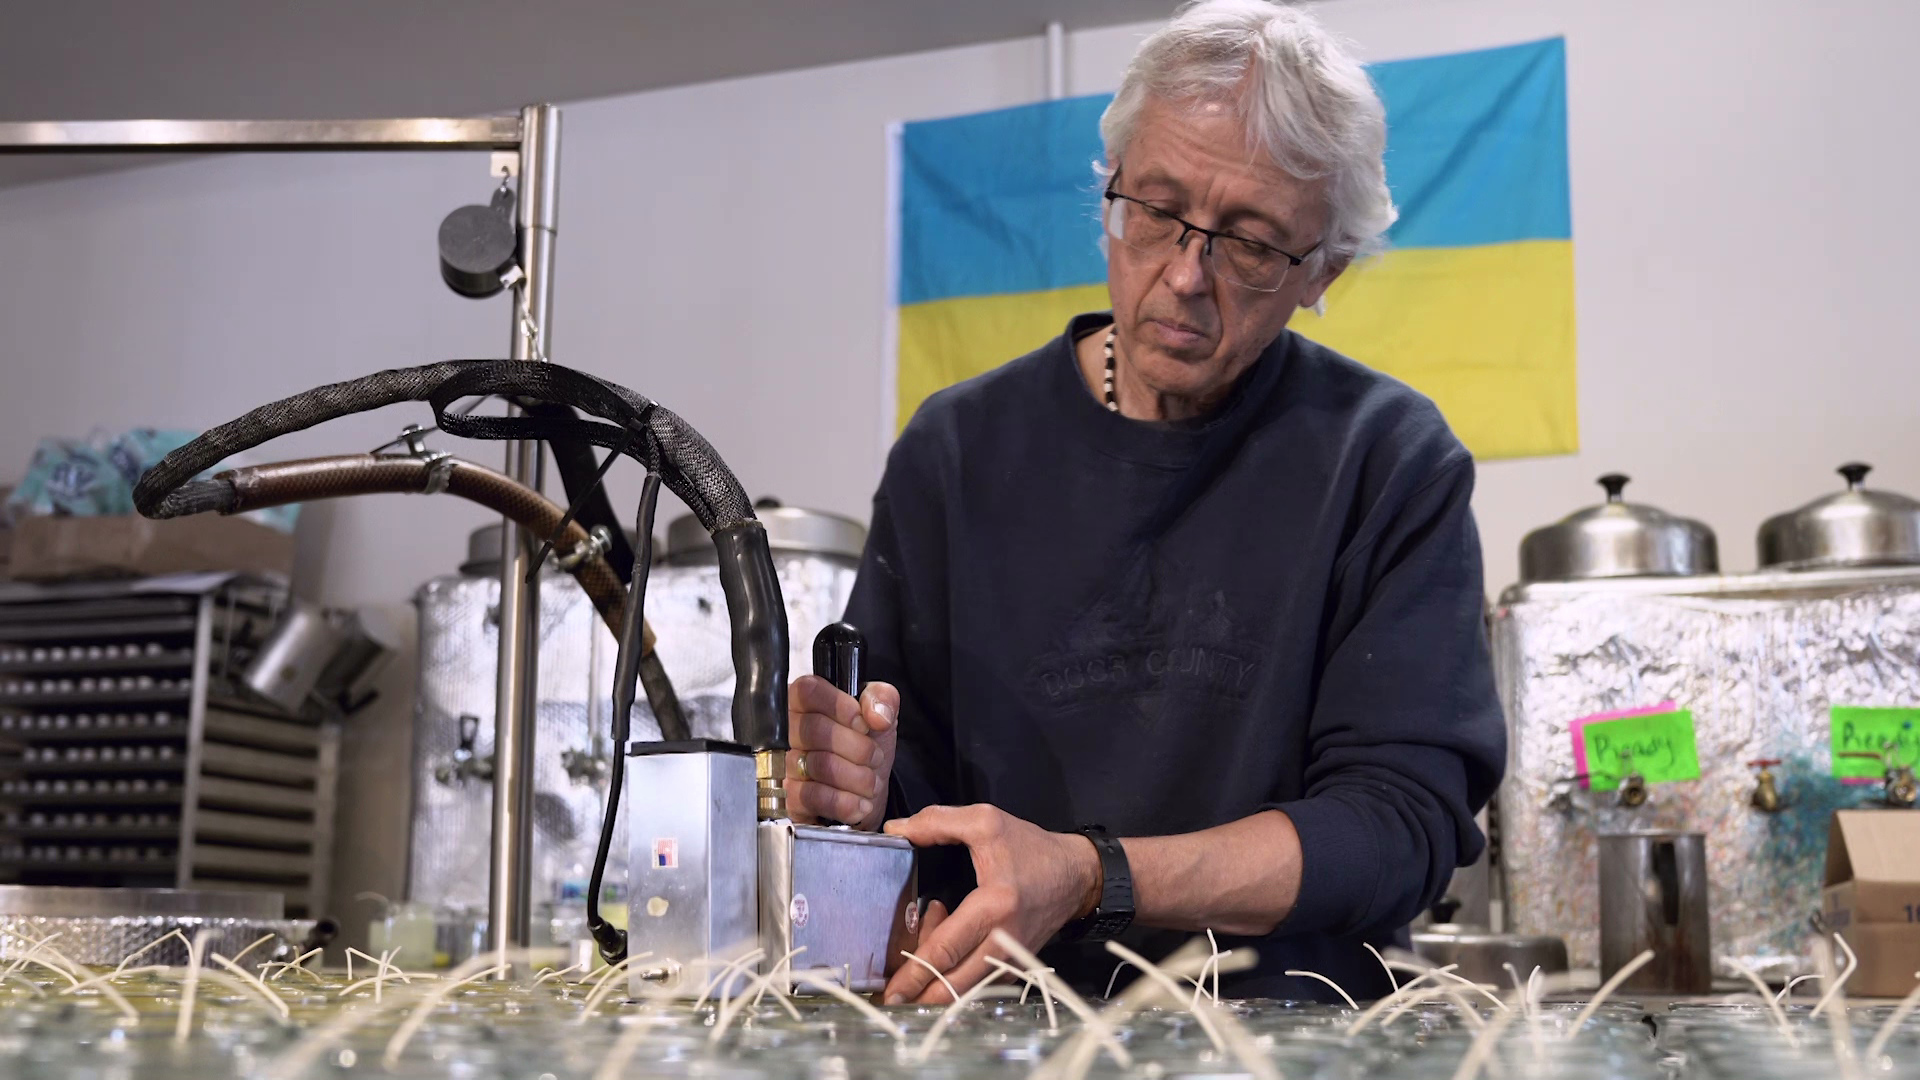 Dr. George Gorchynsky uses a machine to work with wax, with rows of empty candle jars with wicks in the foreground and a Ukrainian flag pinned to the wall in the background.